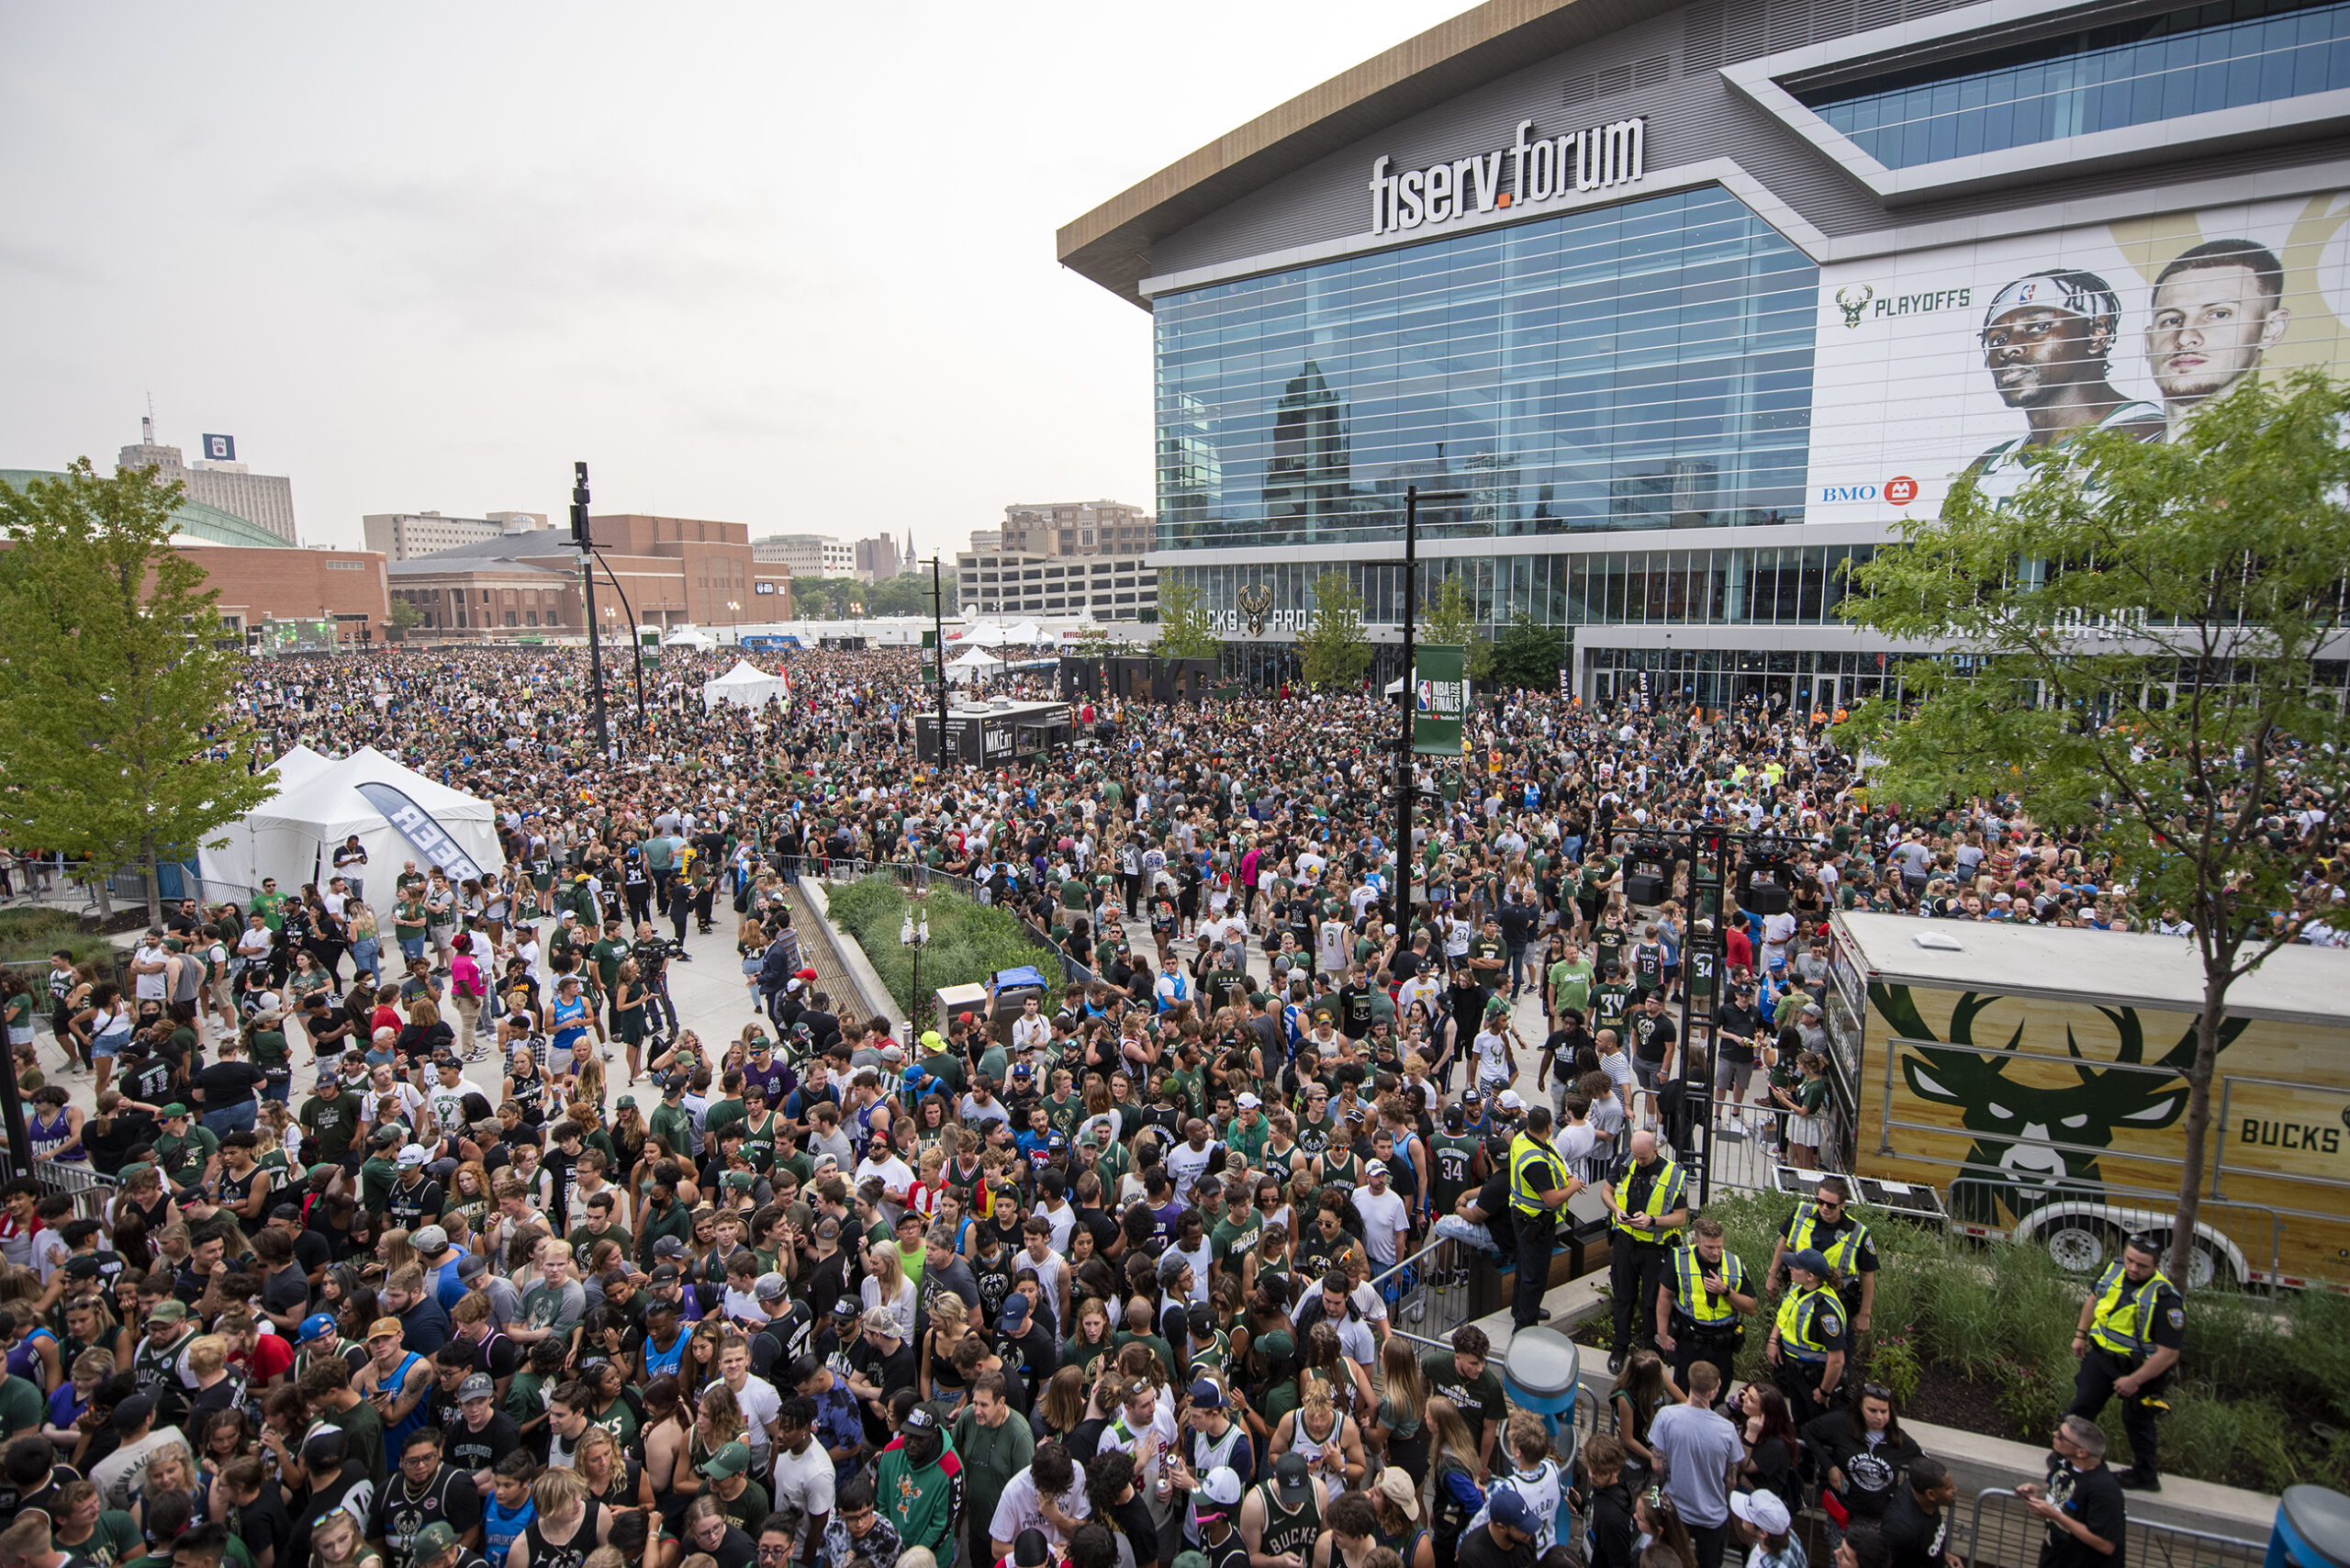 A sea of fans stands can be seen in front of the Fiserv Forum.